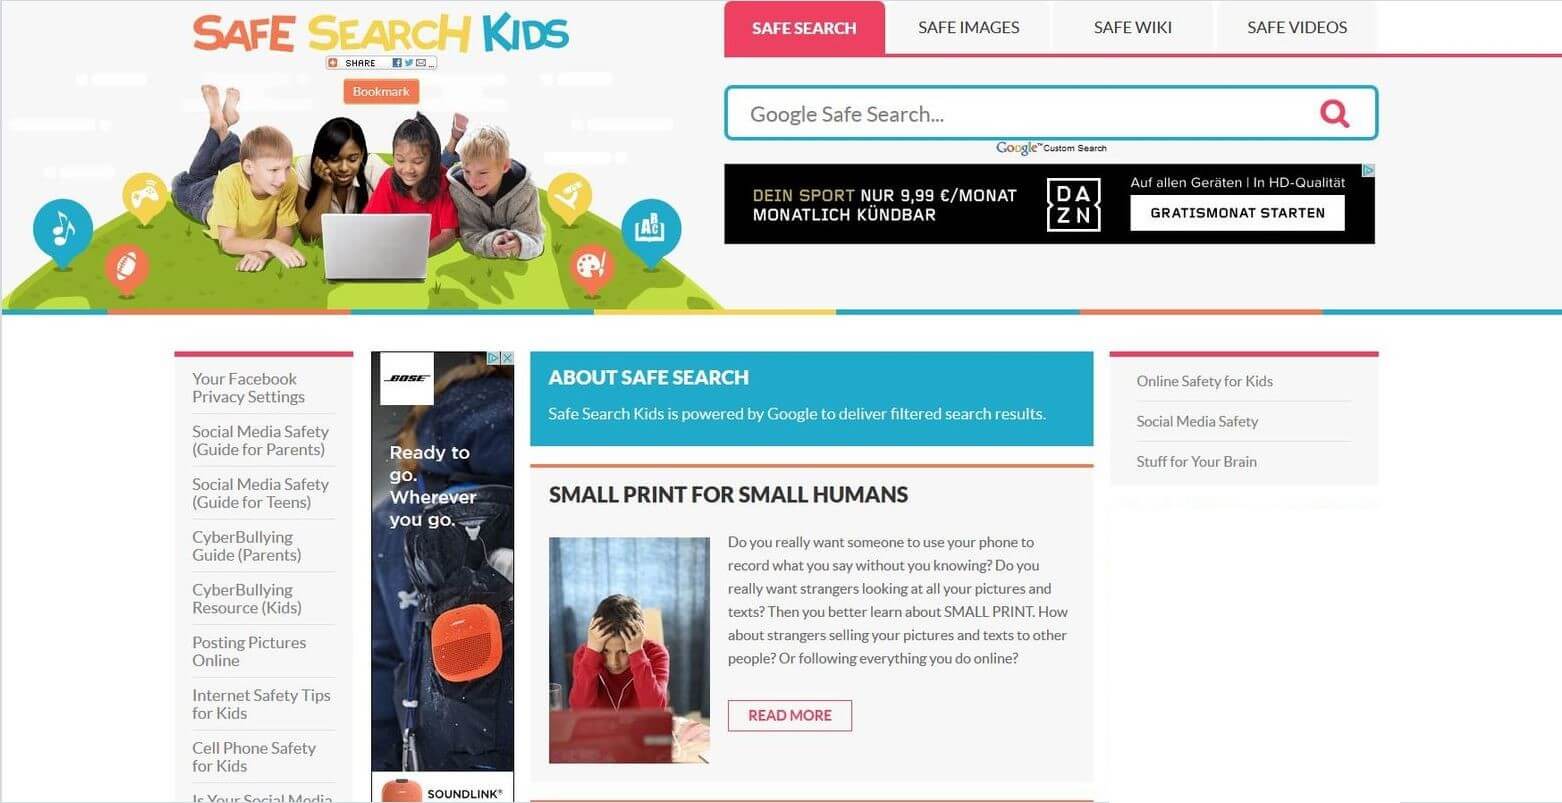 Homepage of the child-friendly search engine Safe Search Kids